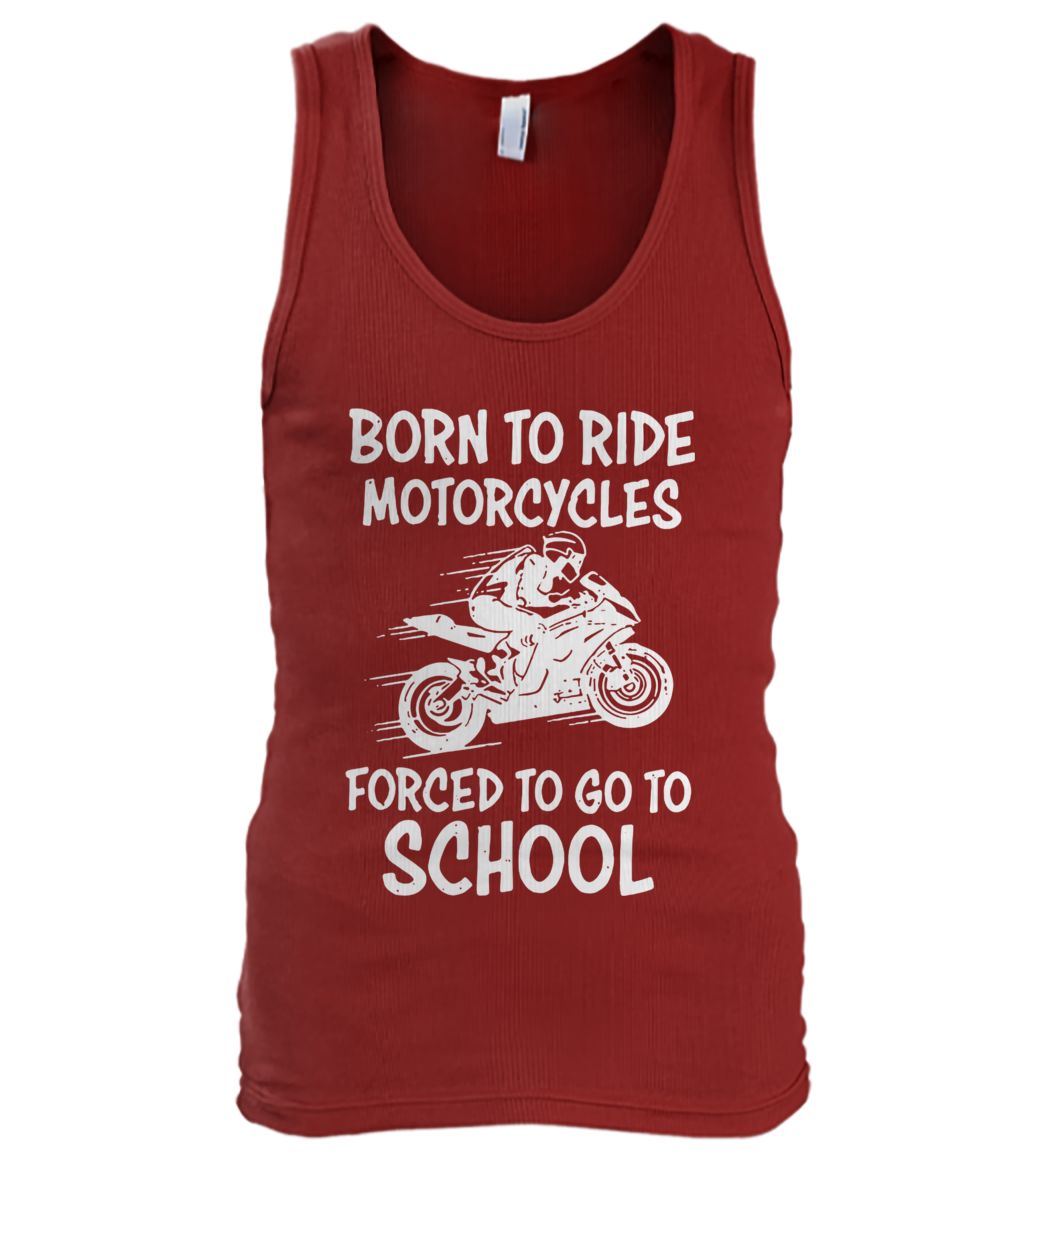 Born to ride motorcycles forced to go to school men's tank top